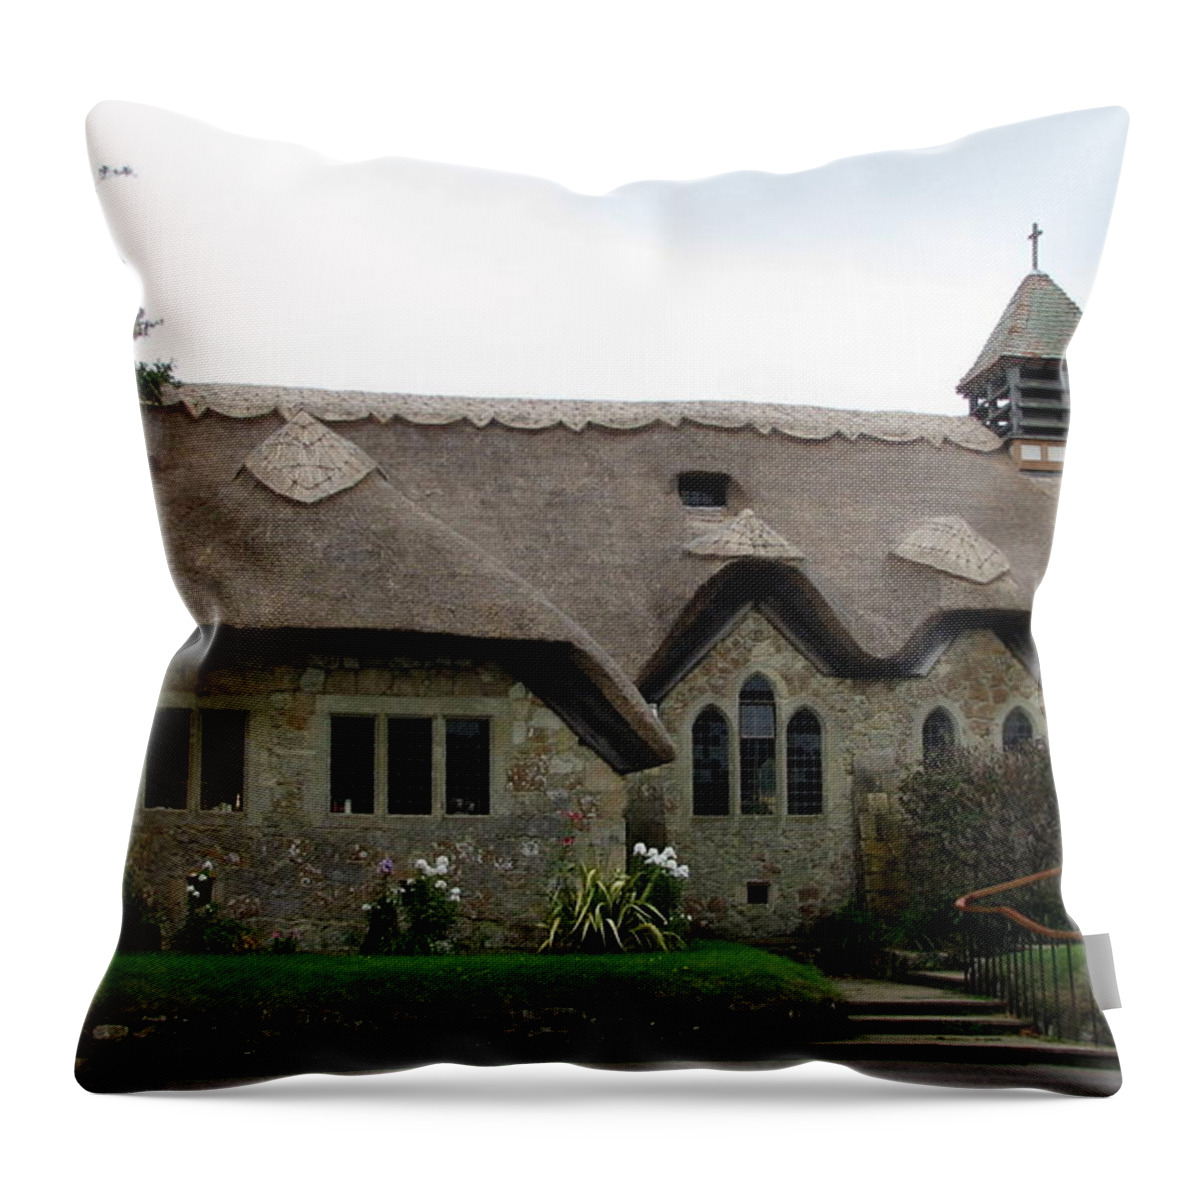 England Throw Pillow featuring the photograph Thatched Church by Carla Parris